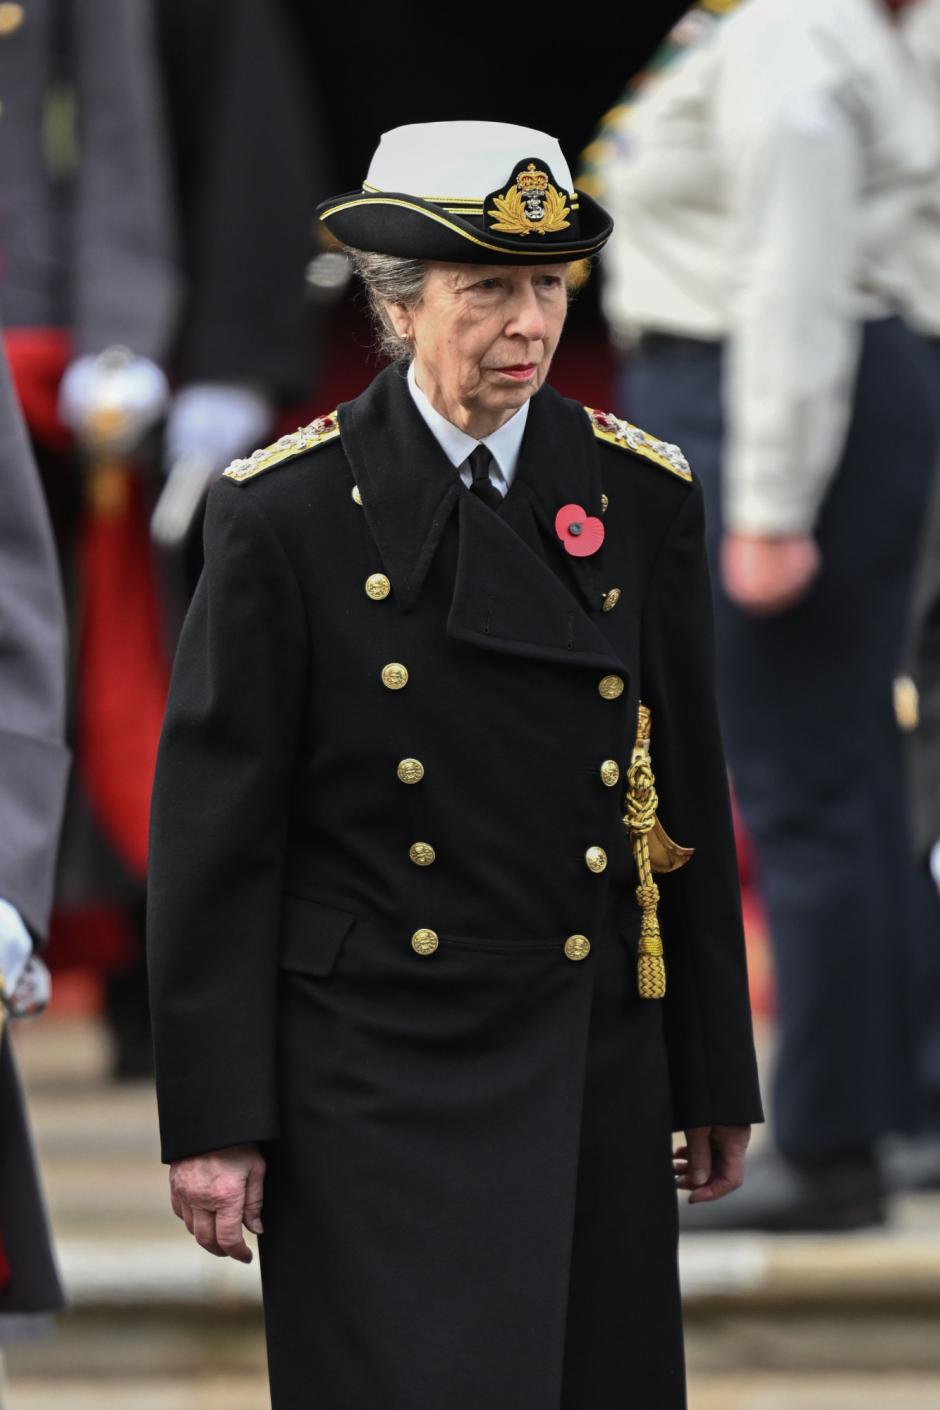 Britain's King Charles III attends the Remembrance Sunday ceremony at the Cenotaph on Whitehall in London, Sunday Nov. 13, 2022. (Toby Melville/Pool via AP) *** Local Caption *** .